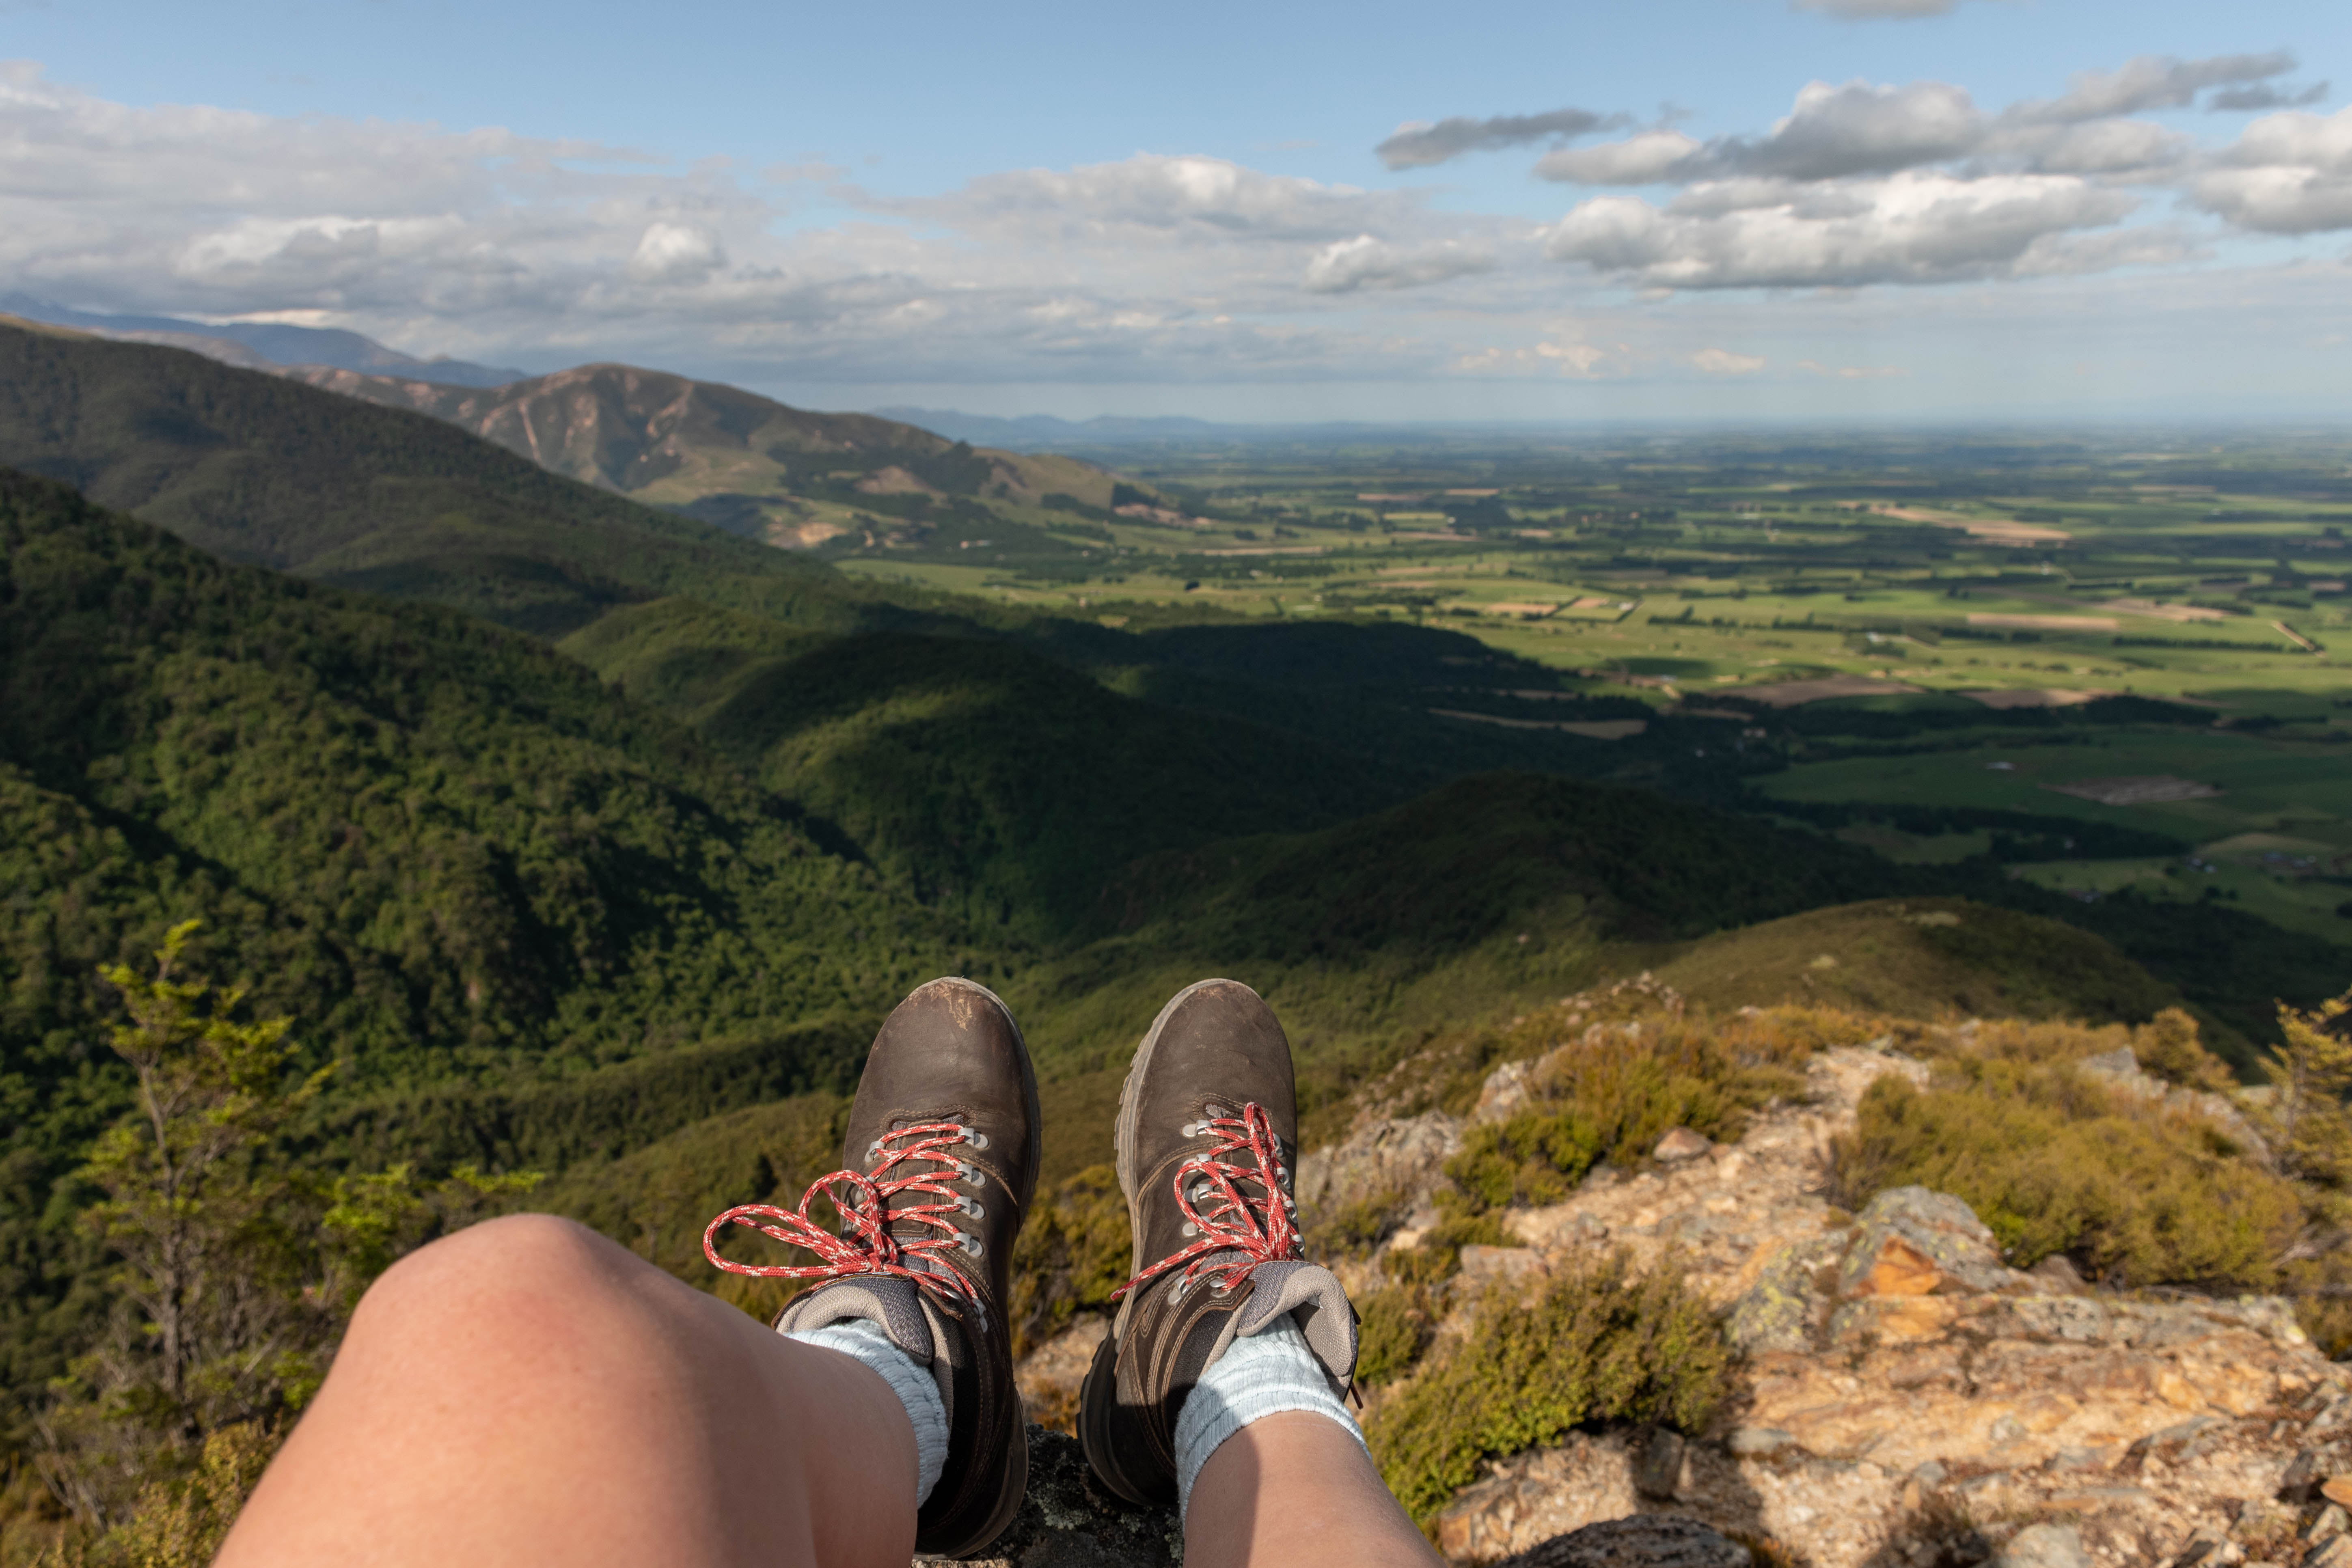 Photo of tramping boots and legs sitting on a tussock mountain top